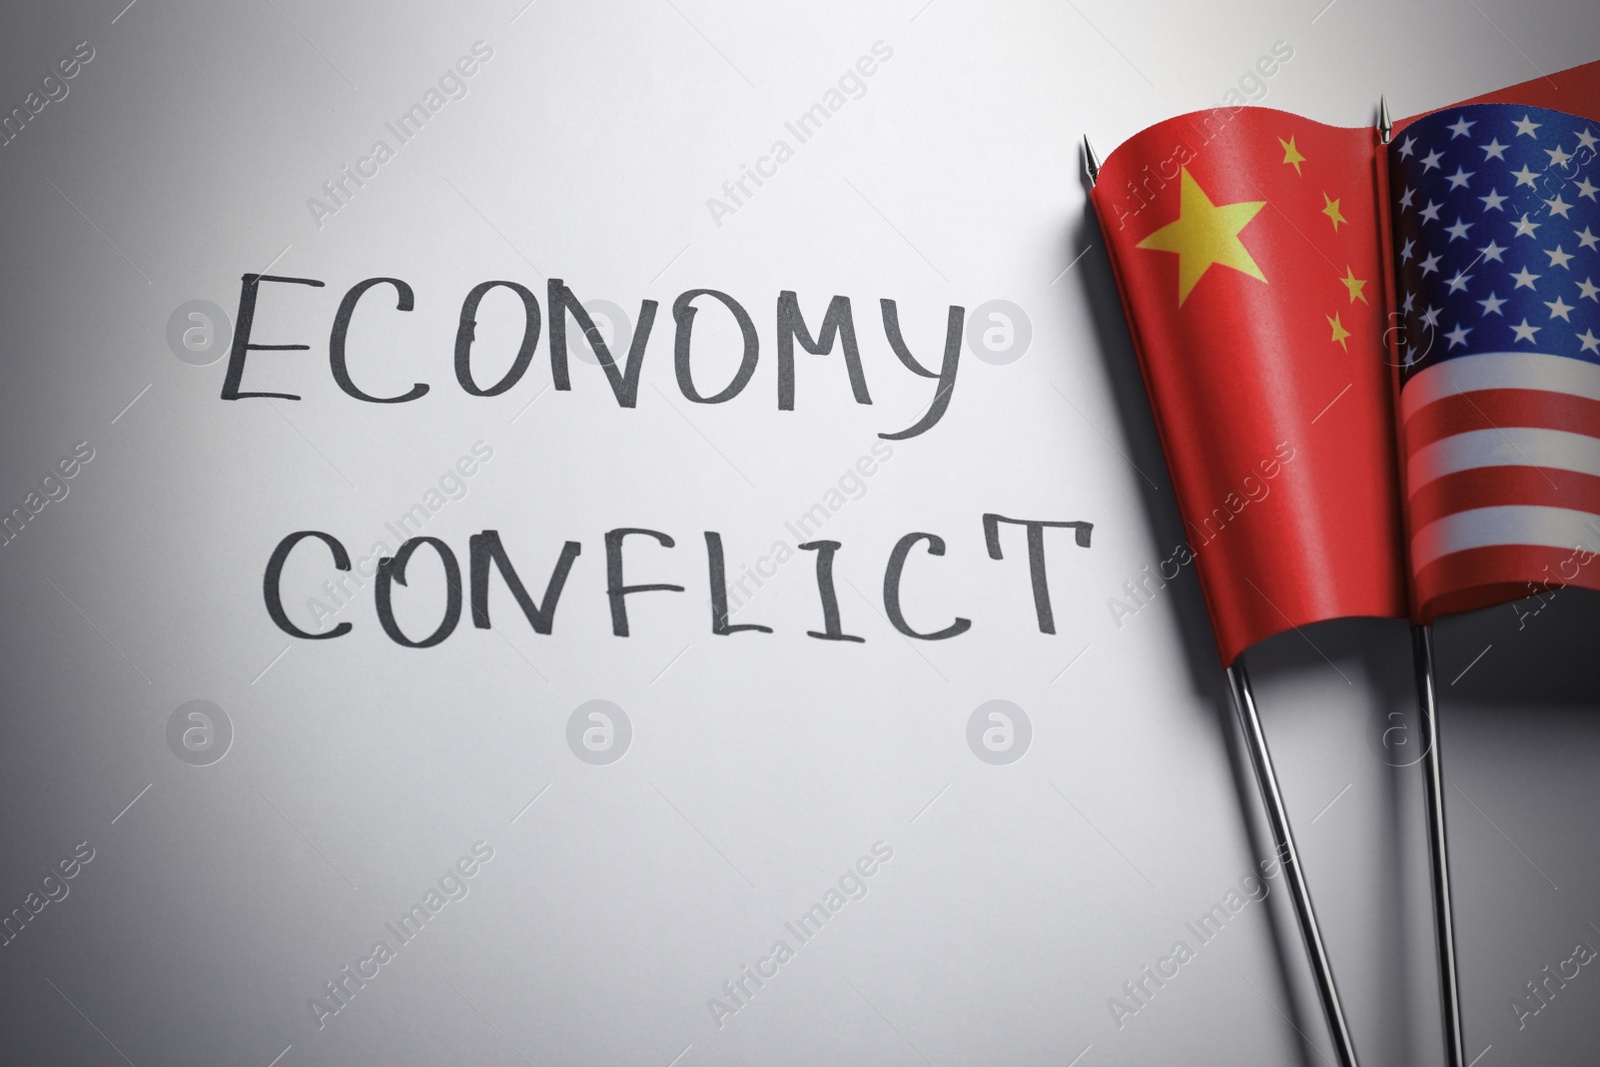 Photo of USA and China flags near words ECONOMY CONFLICT on white background, flat lay